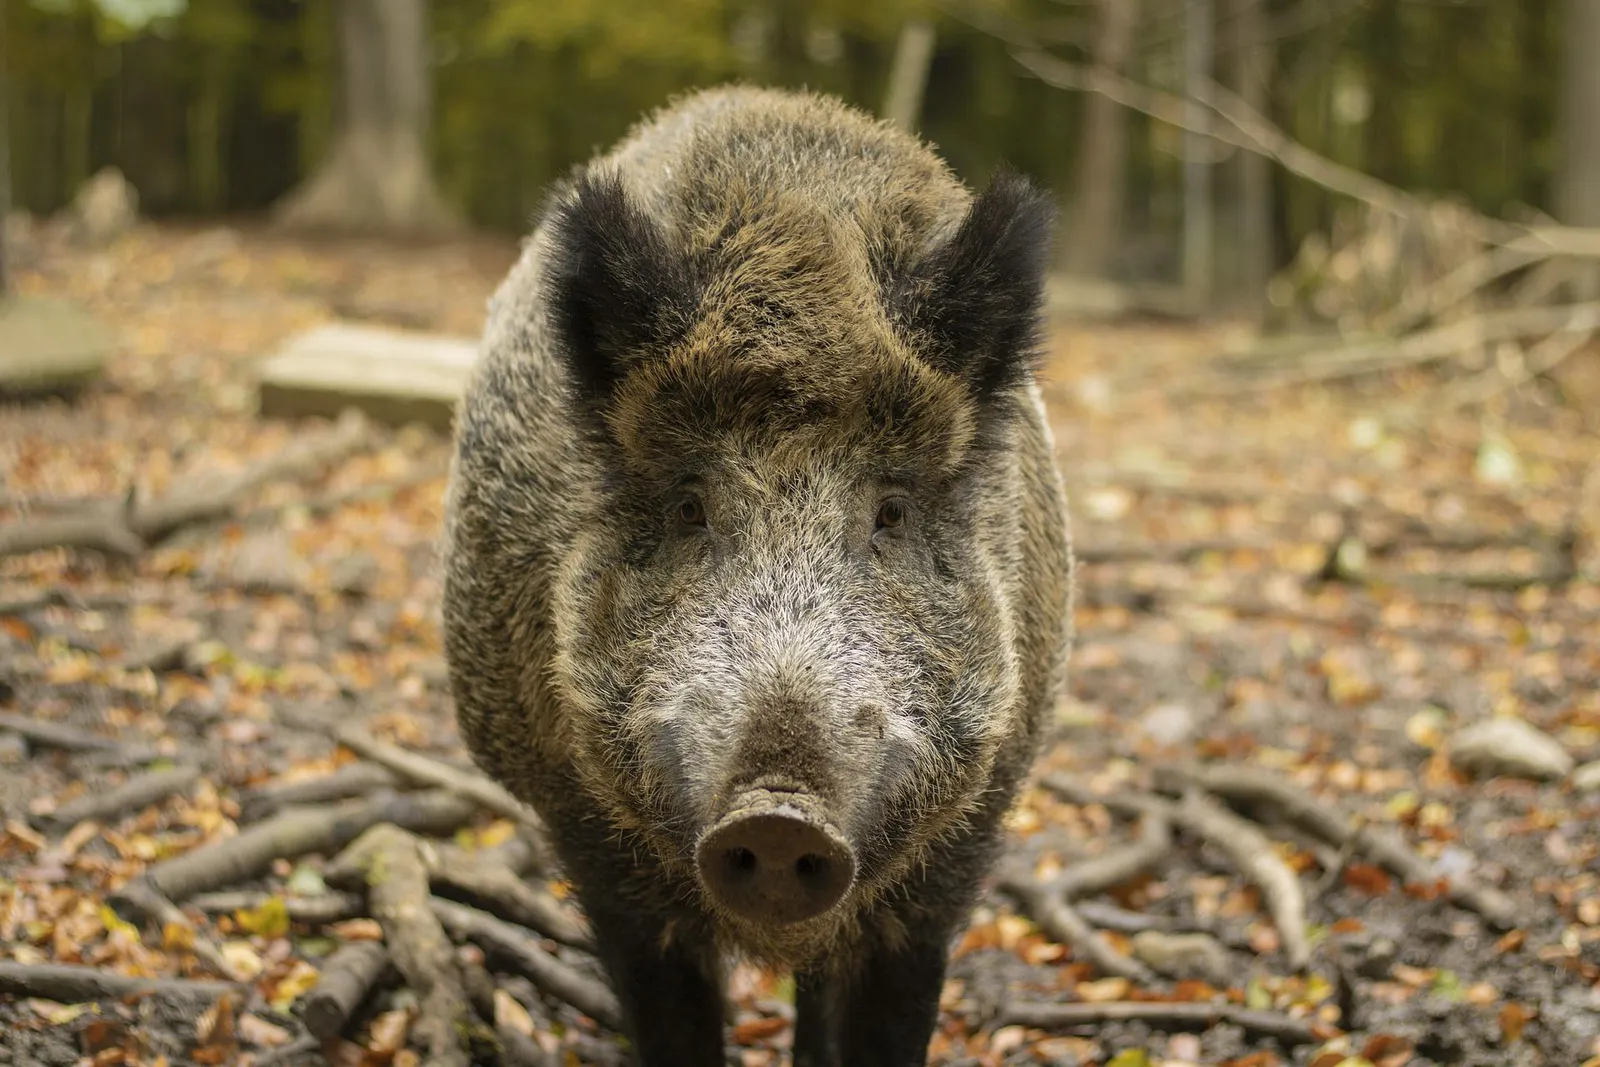 In and around Rome, it’s not uncommon to see hairy wild boars rummaging through garbage bins or wandering down the street. And while residents have 